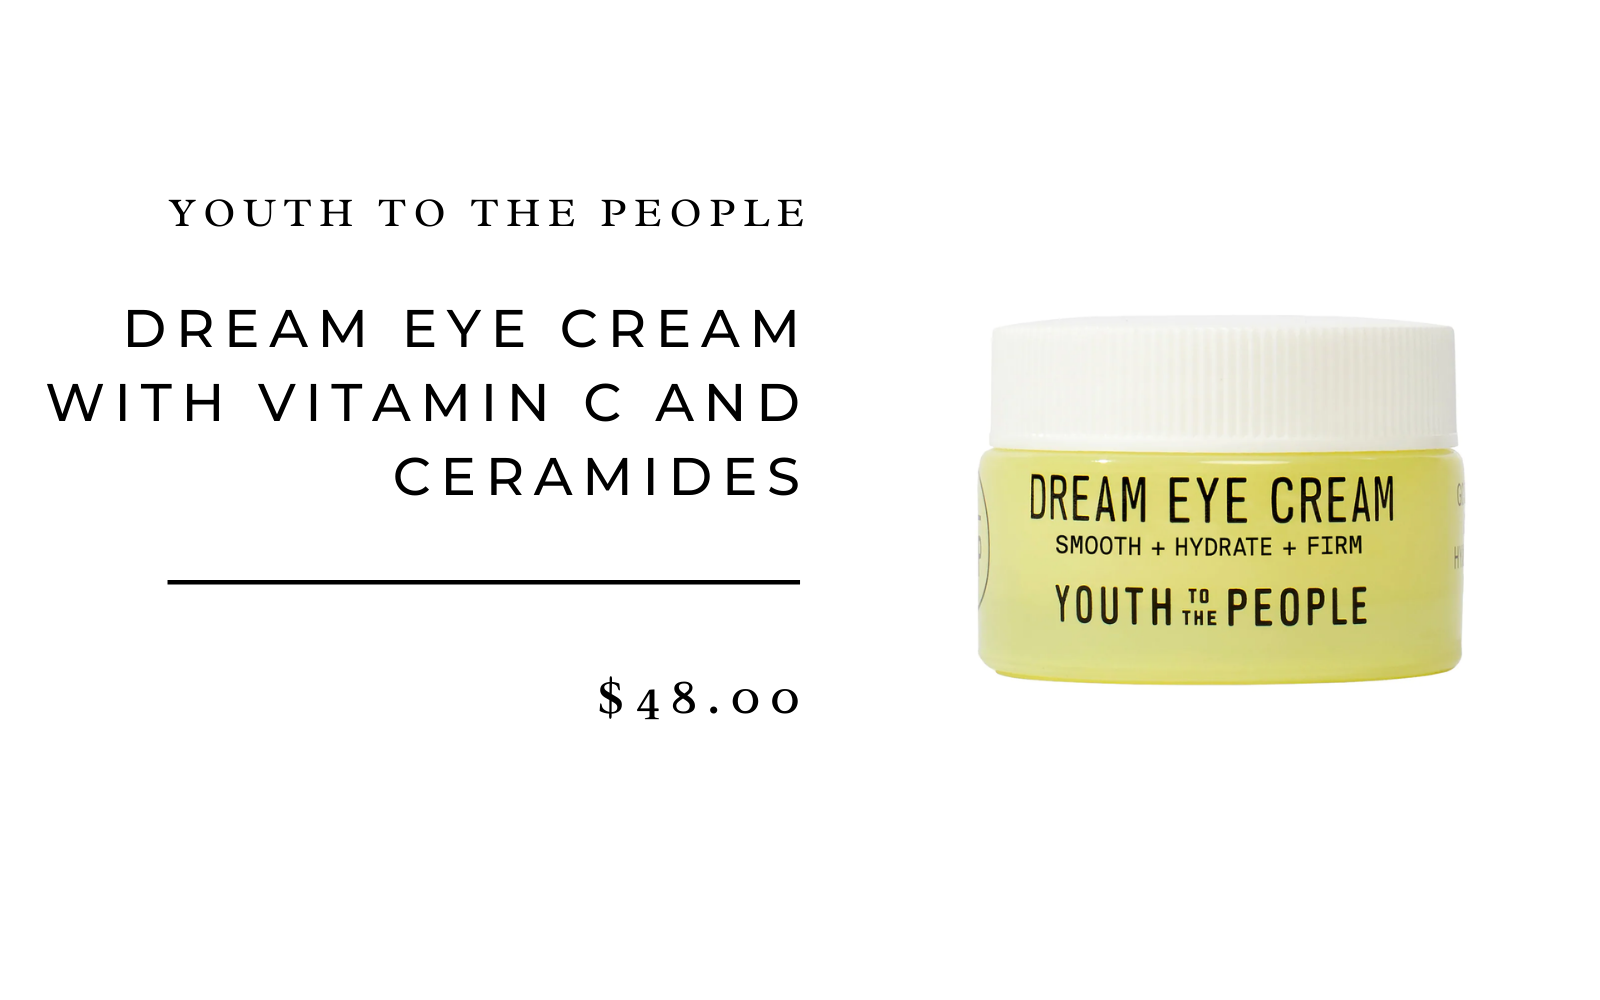 Youth To The People Dream Eye Cream With Vitamin C and Ceramides